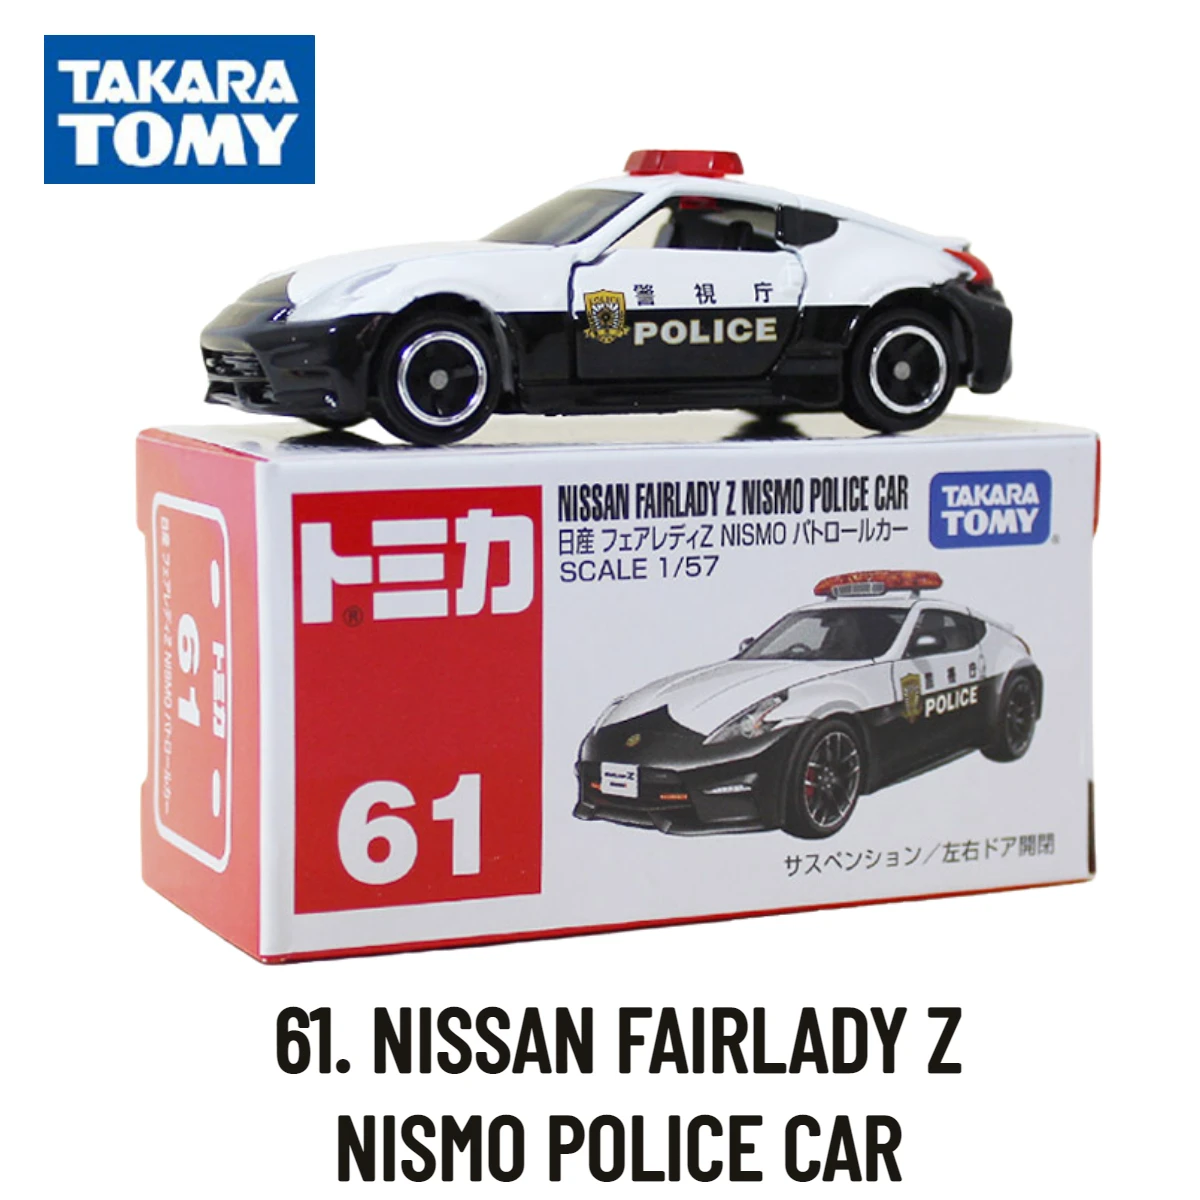 Takara Tomy Tomica Classic 61-90 NISSAN FAIRLADY Z NISMO POLICE Scale Car Model Replica Collection, Kids Xmas Gift Toys for Boys takara tomy tomica premium tp mclaren senna scale car model replica collection kids xmas gift toys for boys